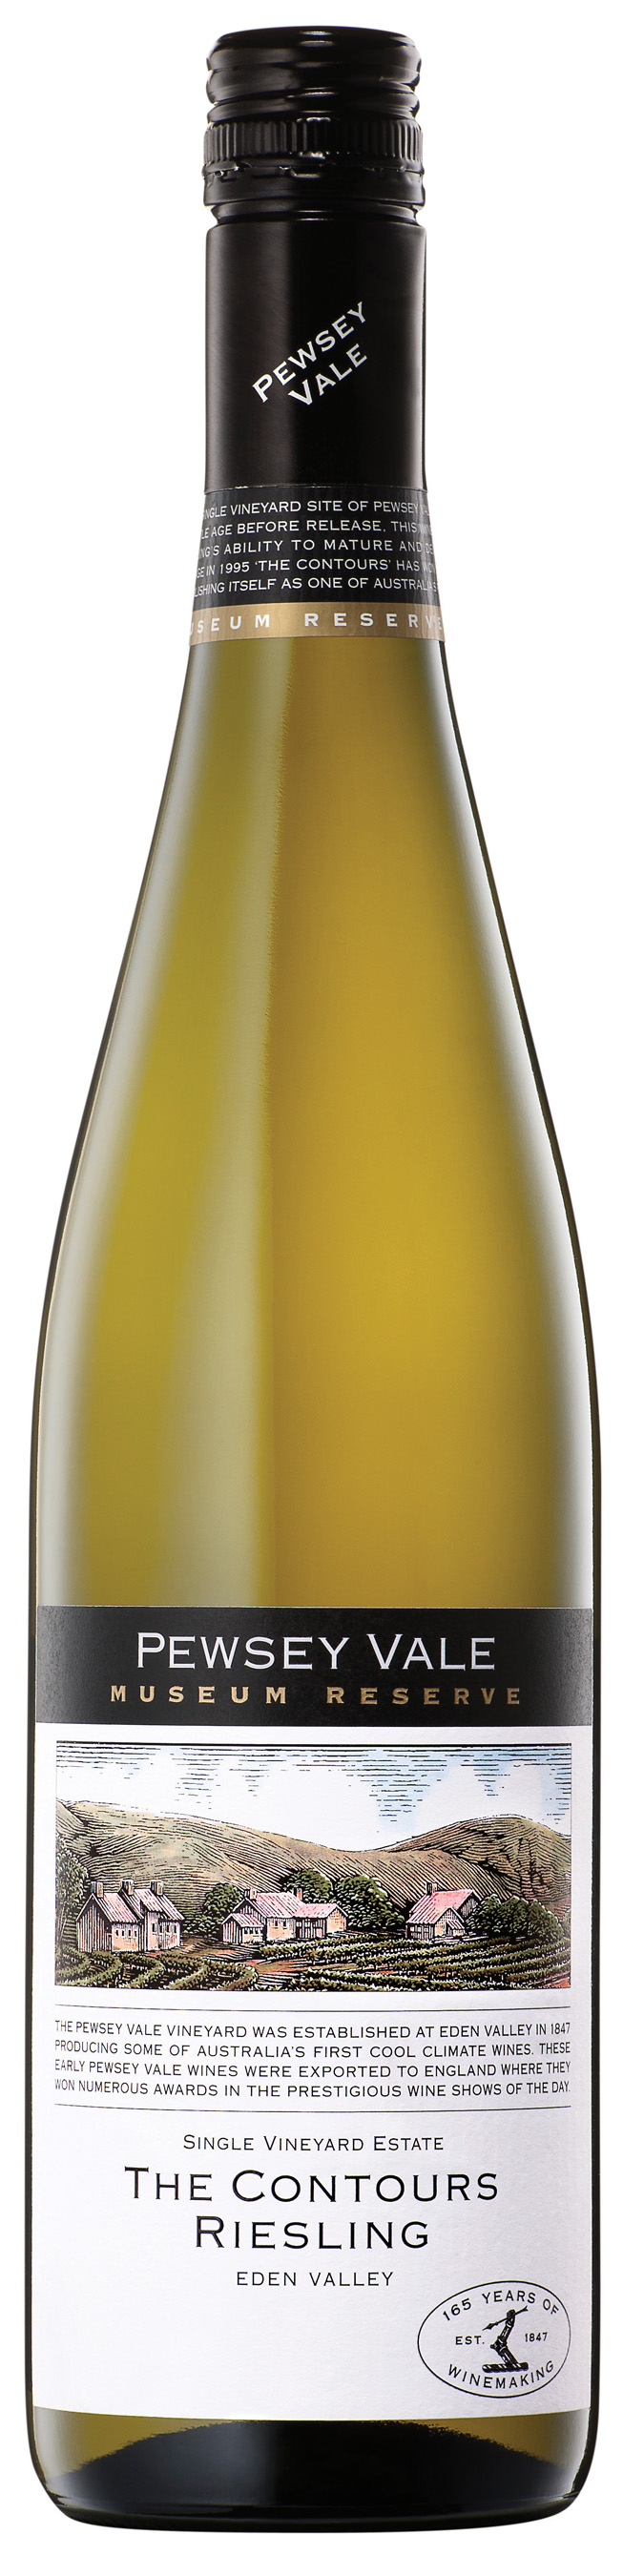 2015 Pewsey Vale Vineyard The Contours Riesling Eden Valley - click image for full description